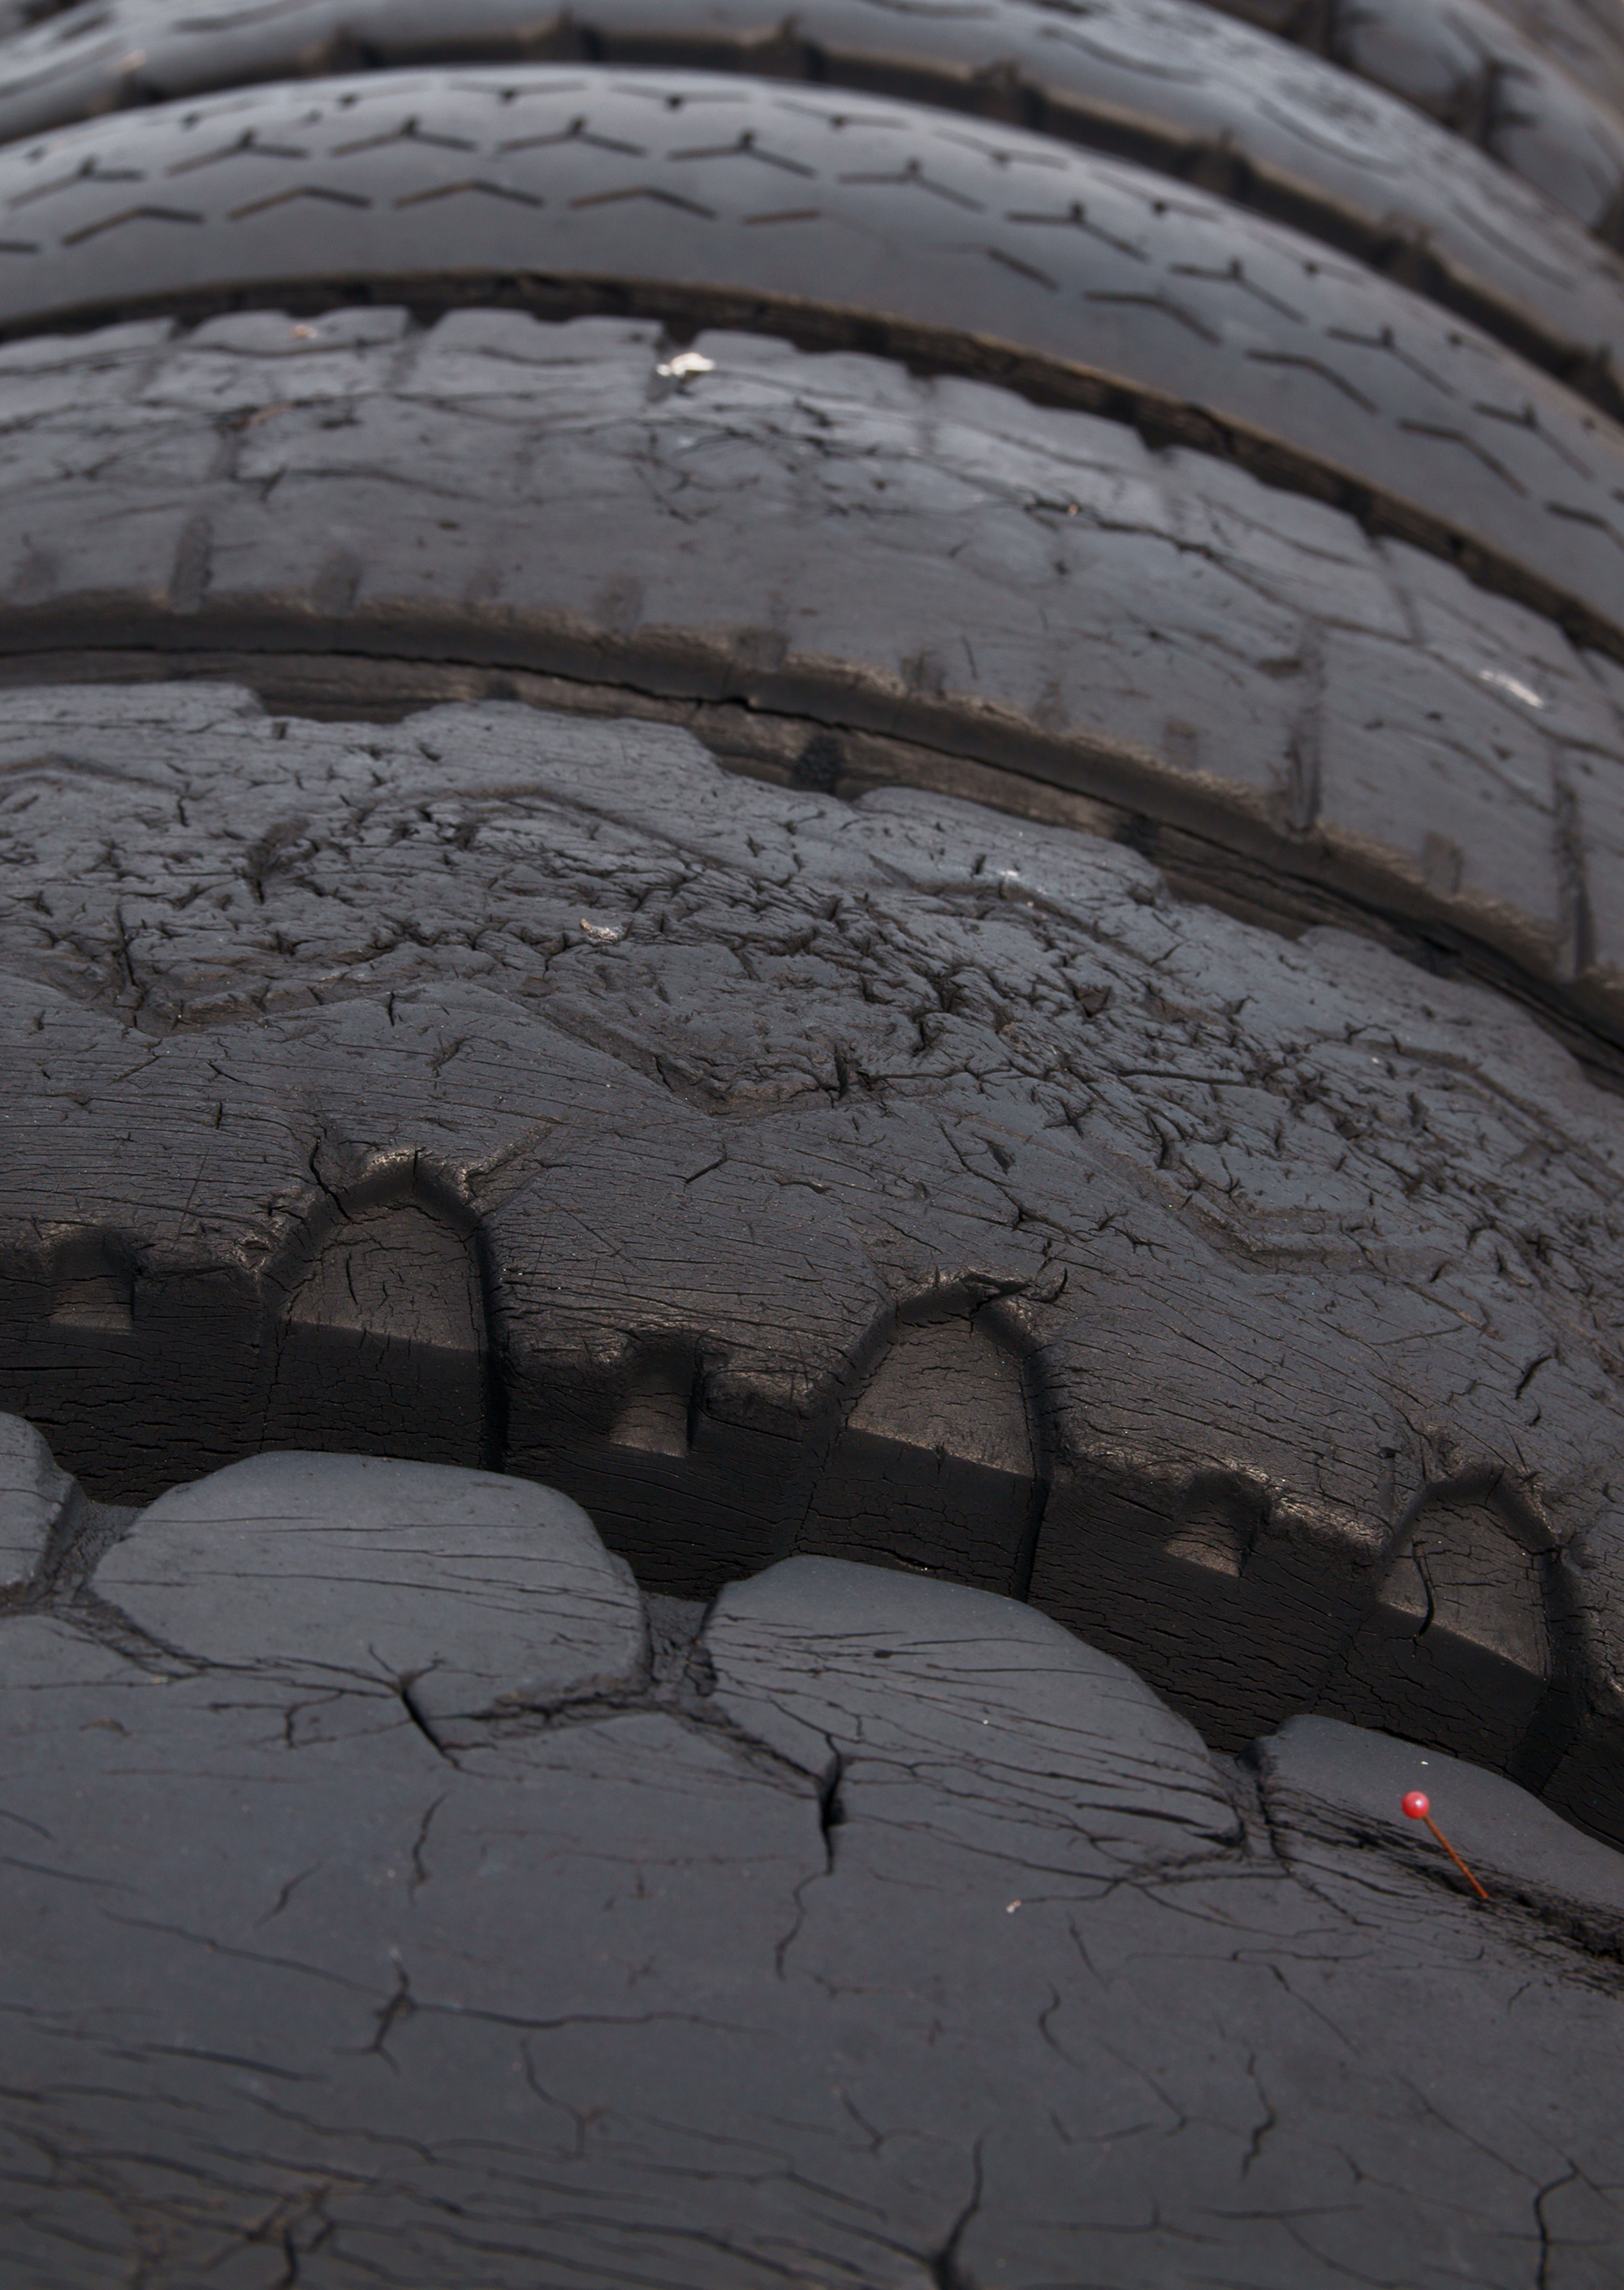 Old tires 2